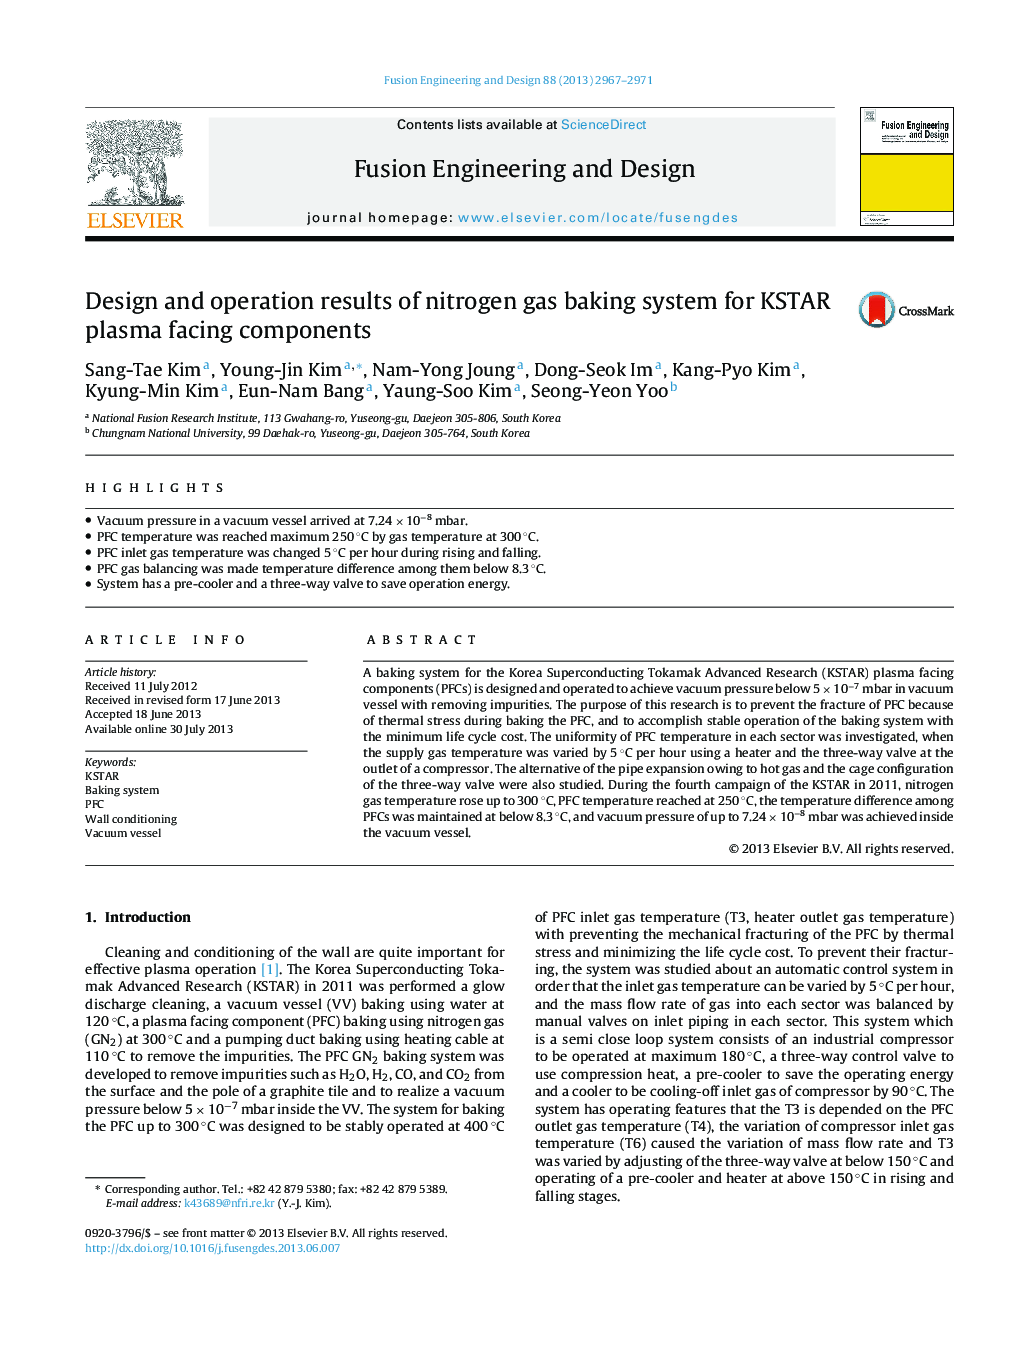 Design and operation results of nitrogen gas baking system for KSTAR plasma facing components